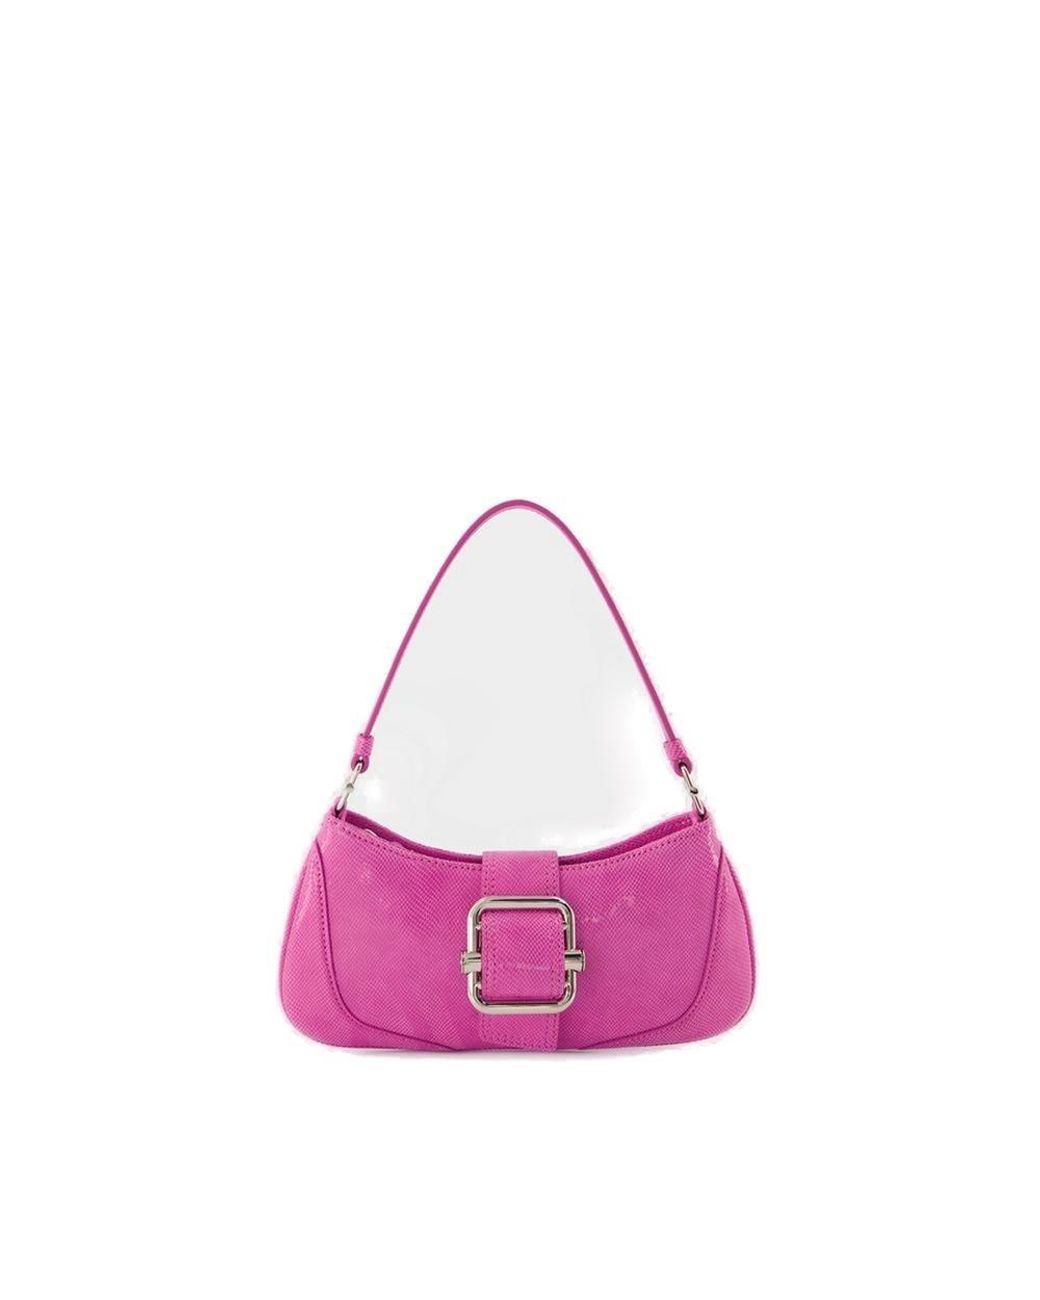 OSOI Brocle Small Hobo Bag in Pink | Lyst